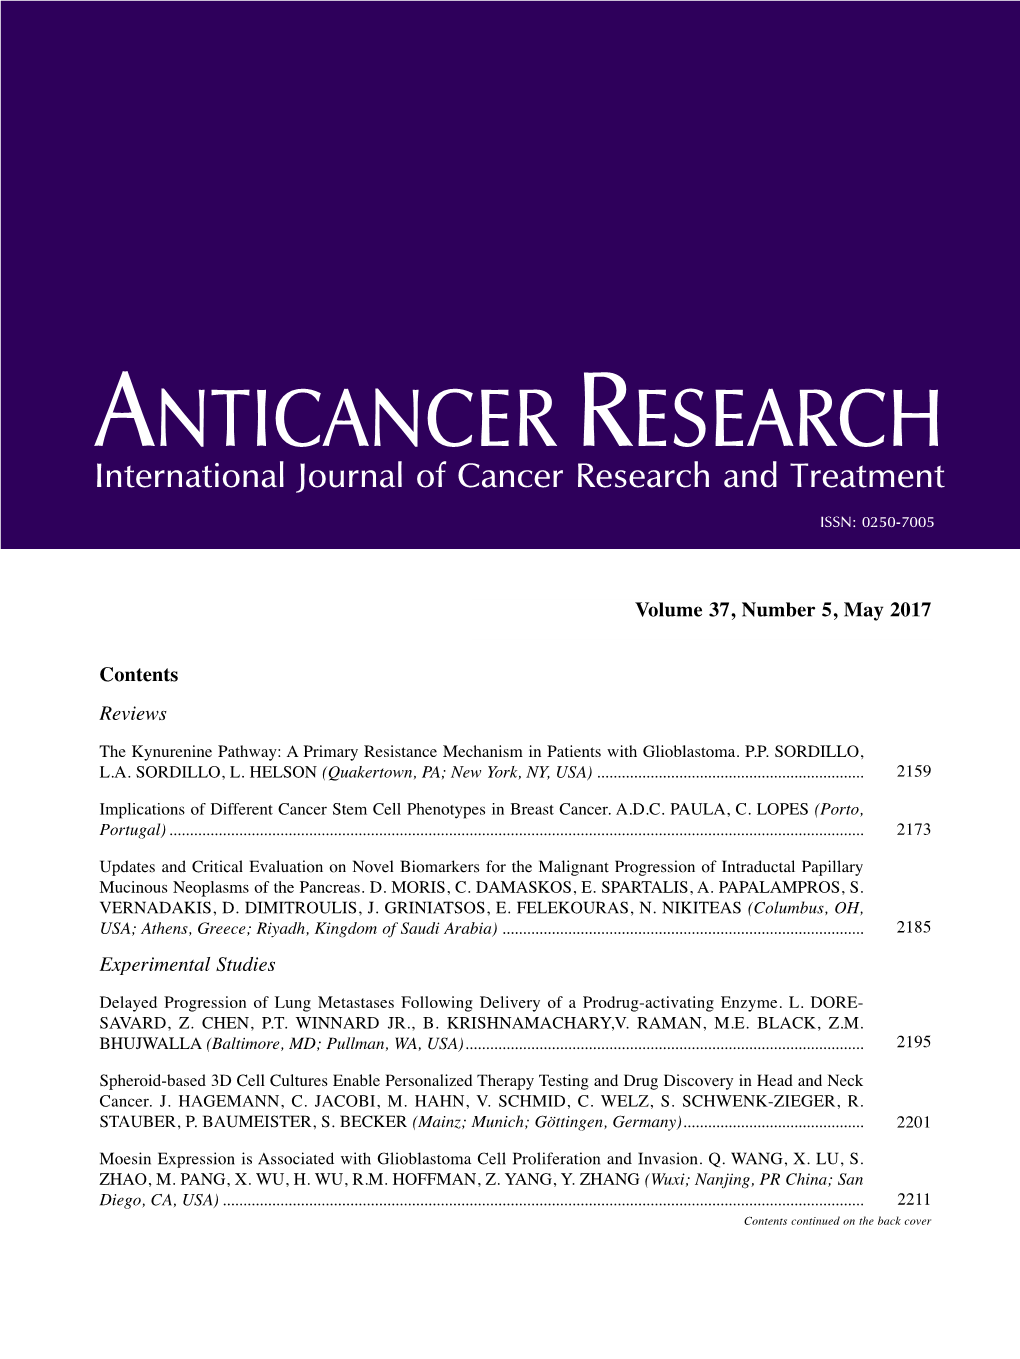 ANTICANCER RESEARCH International Journal of Cancer Research and Treatment